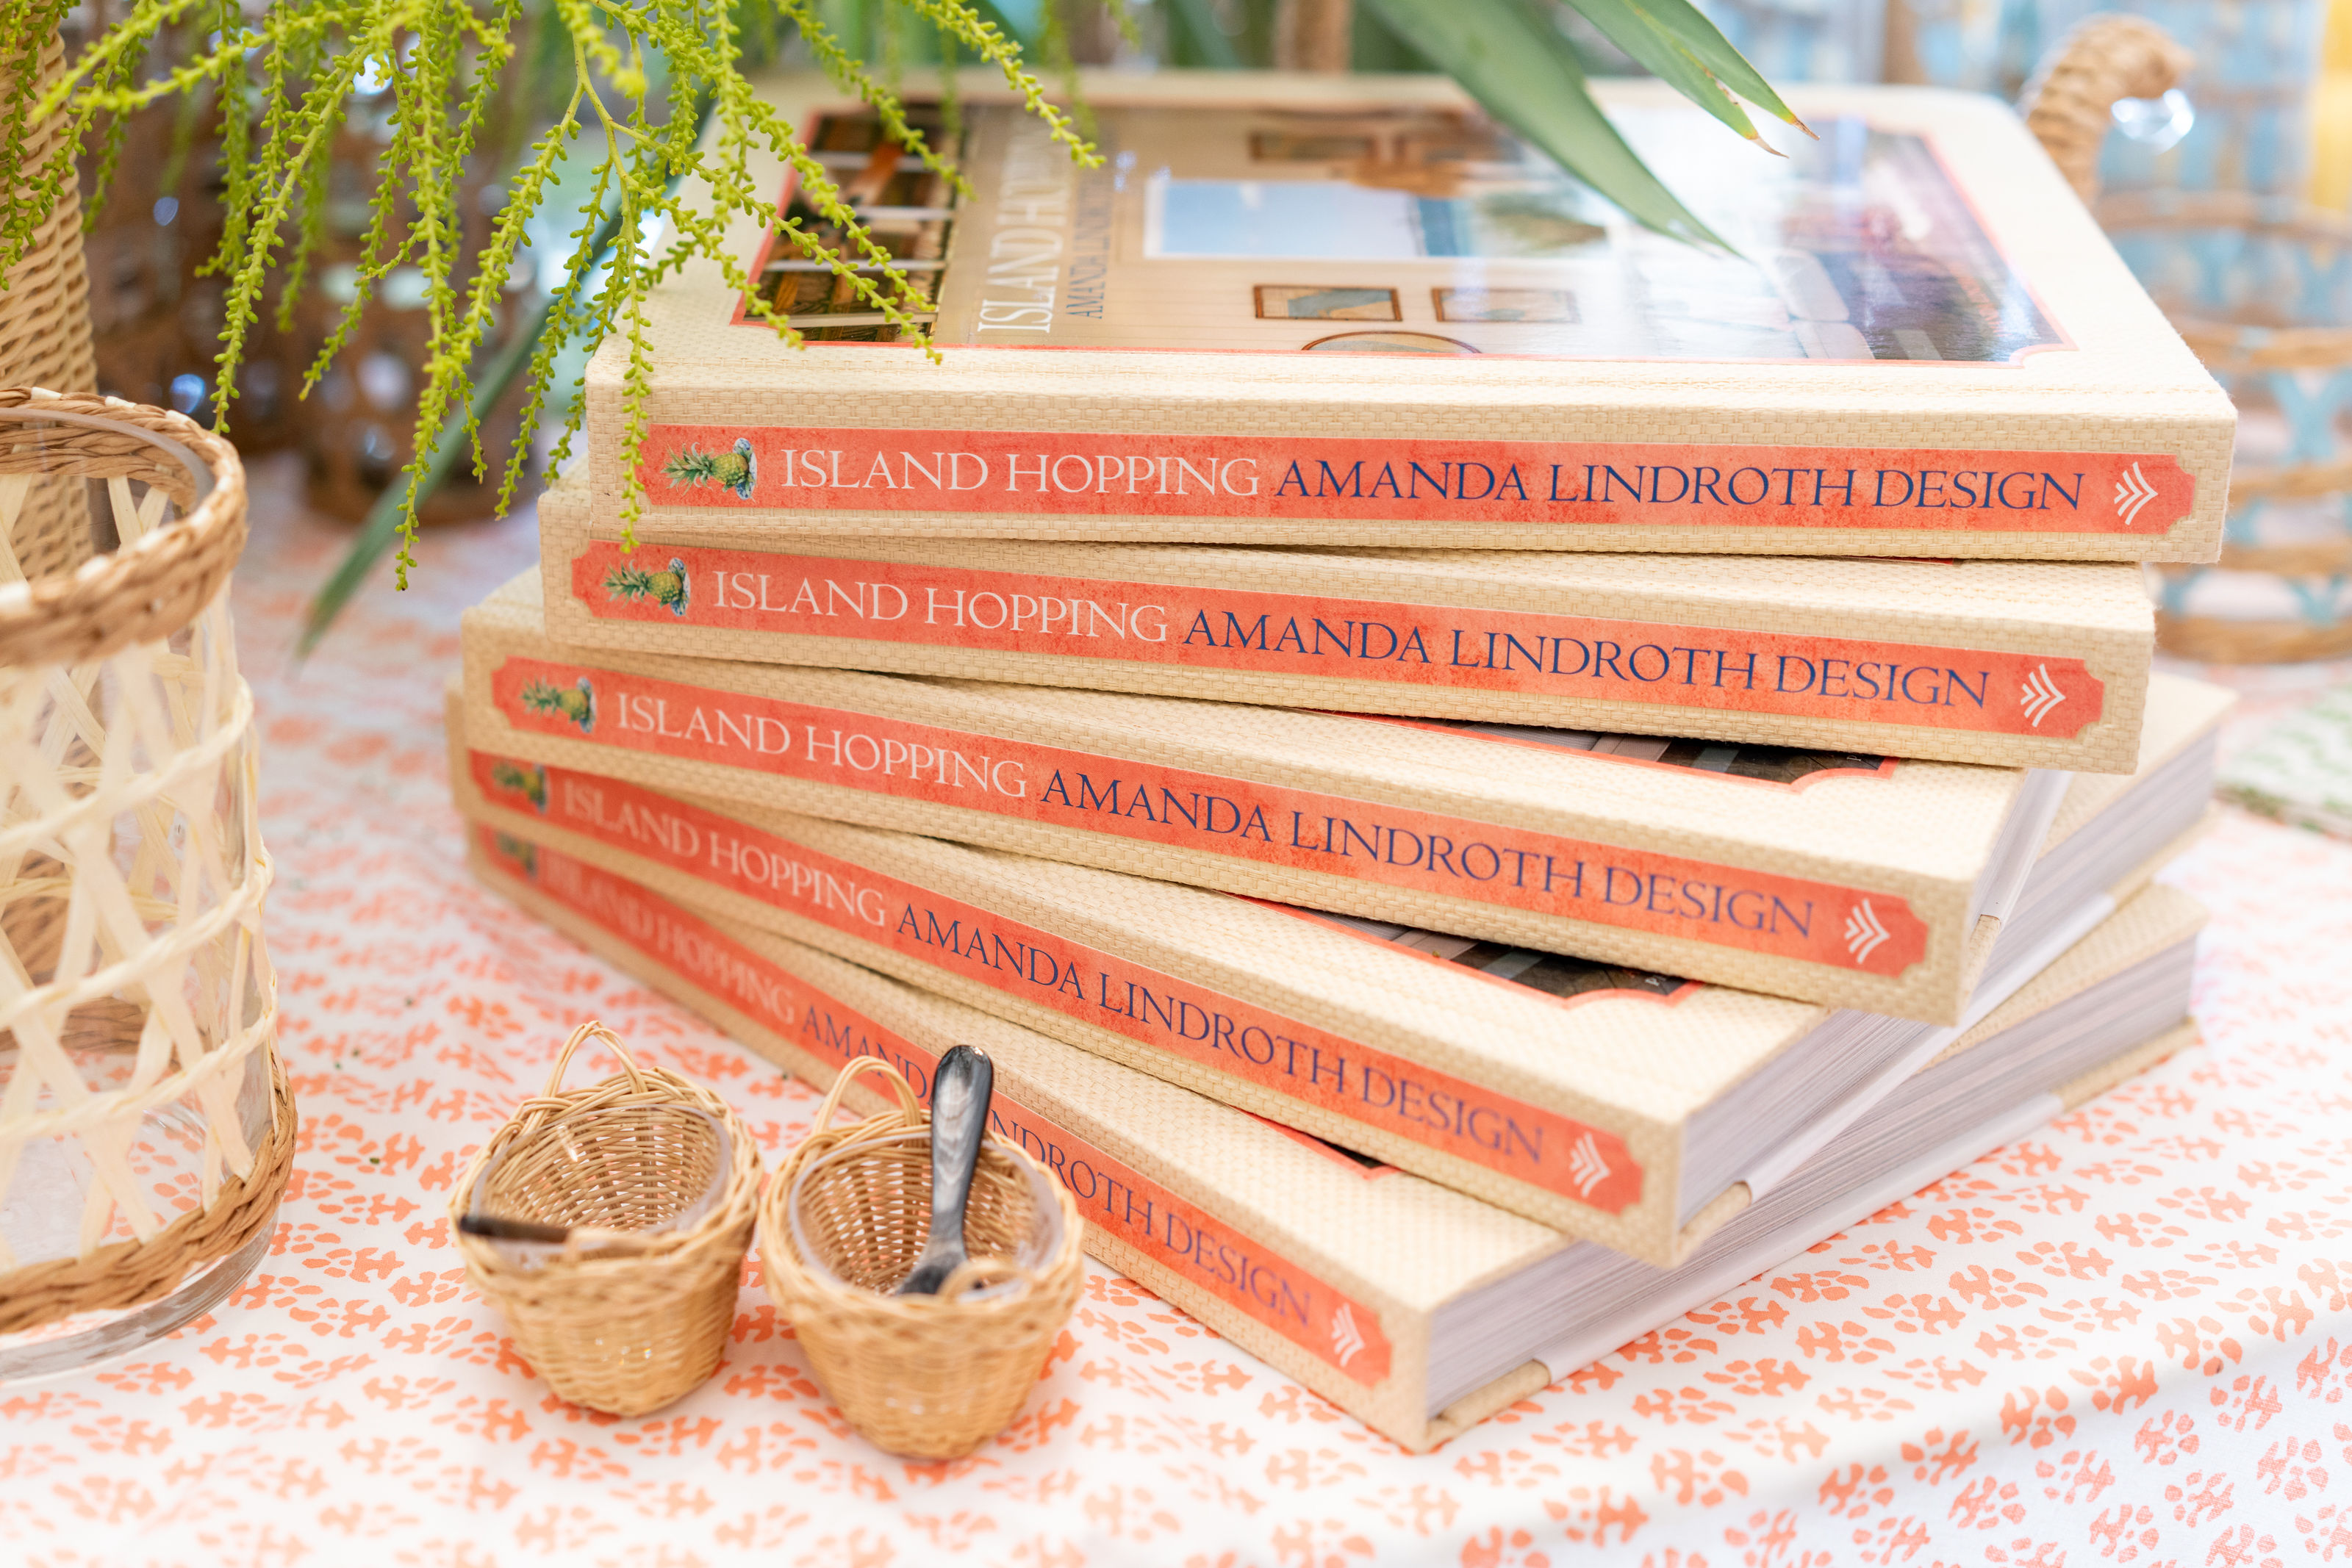 A stack of Amanda Lindroth's book Island Hopping